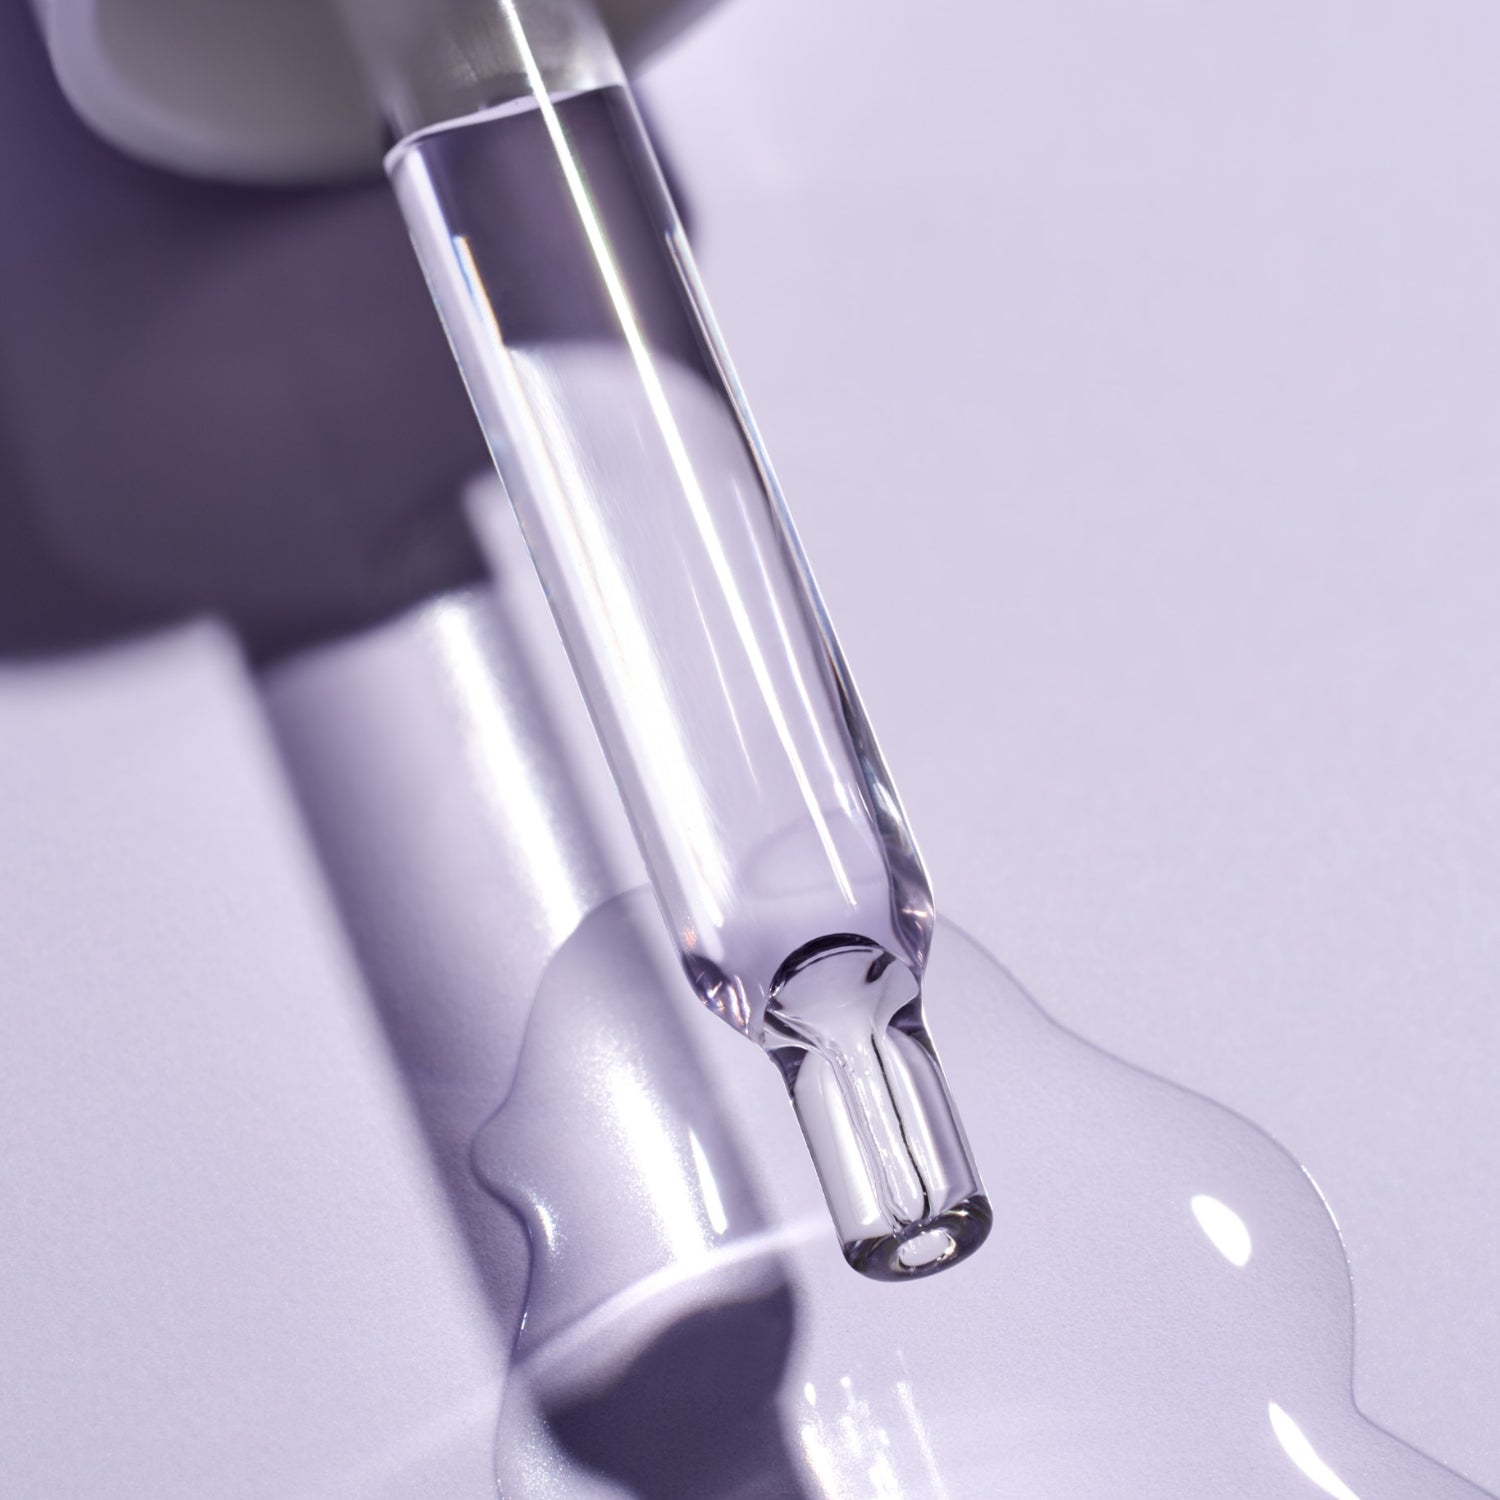 Close-up of glass dropper filled with light purple jelly-like Bakuchiol Retinol Alternative Smoothing Serum and drops of serum on a purple surface